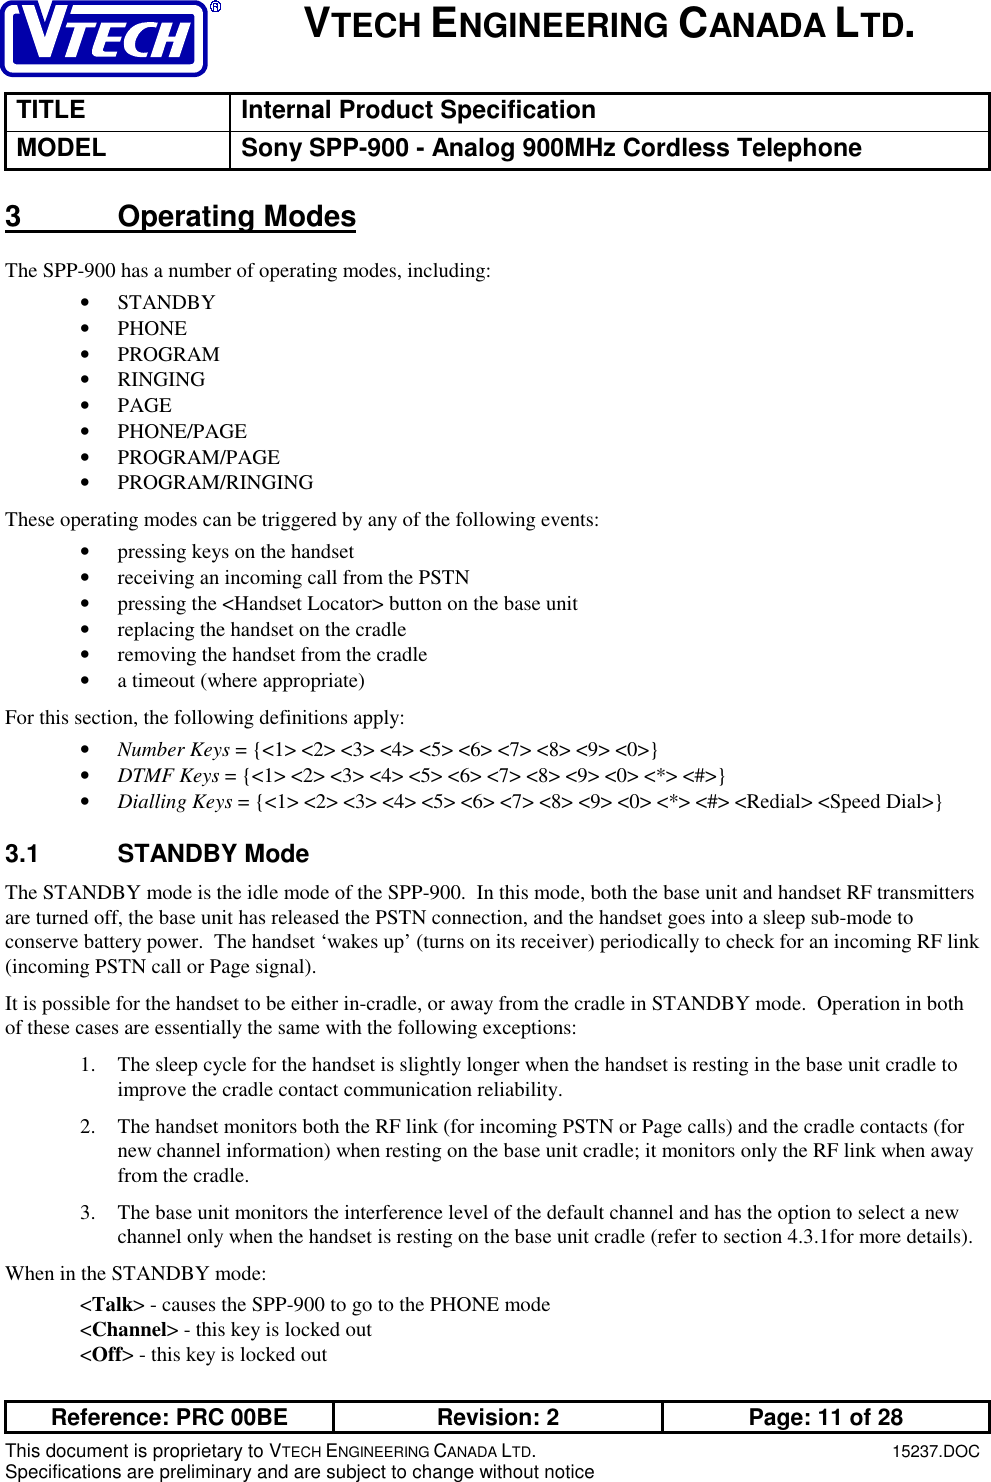 VTECH ENGINEERING CANADA LTD.TITLE Internal Product SpecificationMODEL Sony SPP-900 - Analog 900MHz Cordless TelephoneReference: PRC 00BE Revision: 2 Page: 11 of 28This document is proprietary to VTECH ENGINEERING CANADA LTD.15237.DOCSpecifications are preliminary and are subject to change without notice3 Operating ModesThe SPP-900 has a number of operating modes, including:• STANDBY• PHONE• PROGRAM• RINGING• PAGE• PHONE/PAGE• PROGRAM/PAGE• PROGRAM/RINGINGThese operating modes can be triggered by any of the following events:• pressing keys on the handset• receiving an incoming call from the PSTN• pressing the &lt;Handset Locator&gt; button on the base unit• replacing the handset on the cradle• removing the handset from the cradle• a timeout (where appropriate)For this section, the following definitions apply:• Number Keys = {&lt;1&gt; &lt;2&gt; &lt;3&gt; &lt;4&gt; &lt;5&gt; &lt;6&gt; &lt;7&gt; &lt;8&gt; &lt;9&gt; &lt;0&gt;}• DTMF Keys = {&lt;1&gt; &lt;2&gt; &lt;3&gt; &lt;4&gt; &lt;5&gt; &lt;6&gt; &lt;7&gt; &lt;8&gt; &lt;9&gt; &lt;0&gt; &lt;*&gt; &lt;#&gt;}• Dialling Keys = {&lt;1&gt; &lt;2&gt; &lt;3&gt; &lt;4&gt; &lt;5&gt; &lt;6&gt; &lt;7&gt; &lt;8&gt; &lt;9&gt; &lt;0&gt; &lt;*&gt; &lt;#&gt; &lt;Redial&gt; &lt;Speed Dial&gt;}3.1 STANDBY ModeThe STANDBY mode is the idle mode of the SPP-900.  In this mode, both the base unit and handset RF transmittersare turned off, the base unit has released the PSTN connection, and the handset goes into a sleep sub-mode toconserve battery power.  The handset ‘wakes up’ (turns on its receiver) periodically to check for an incoming RF link(incoming PSTN call or Page signal).It is possible for the handset to be either in-cradle, or away from the cradle in STANDBY mode.  Operation in bothof these cases are essentially the same with the following exceptions:1. The sleep cycle for the handset is slightly longer when the handset is resting in the base unit cradle toimprove the cradle contact communication reliability.2. The handset monitors both the RF link (for incoming PSTN or Page calls) and the cradle contacts (fornew channel information) when resting on the base unit cradle; it monitors only the RF link when awayfrom the cradle.3. The base unit monitors the interference level of the default channel and has the option to select a newchannel only when the handset is resting on the base unit cradle (refer to section 4.3.1for more details).When in the STANDBY mode:&lt;Talk&gt; - causes the SPP-900 to go to the PHONE mode&lt;Channel&gt; - this key is locked out&lt;Off&gt; - this key is locked out